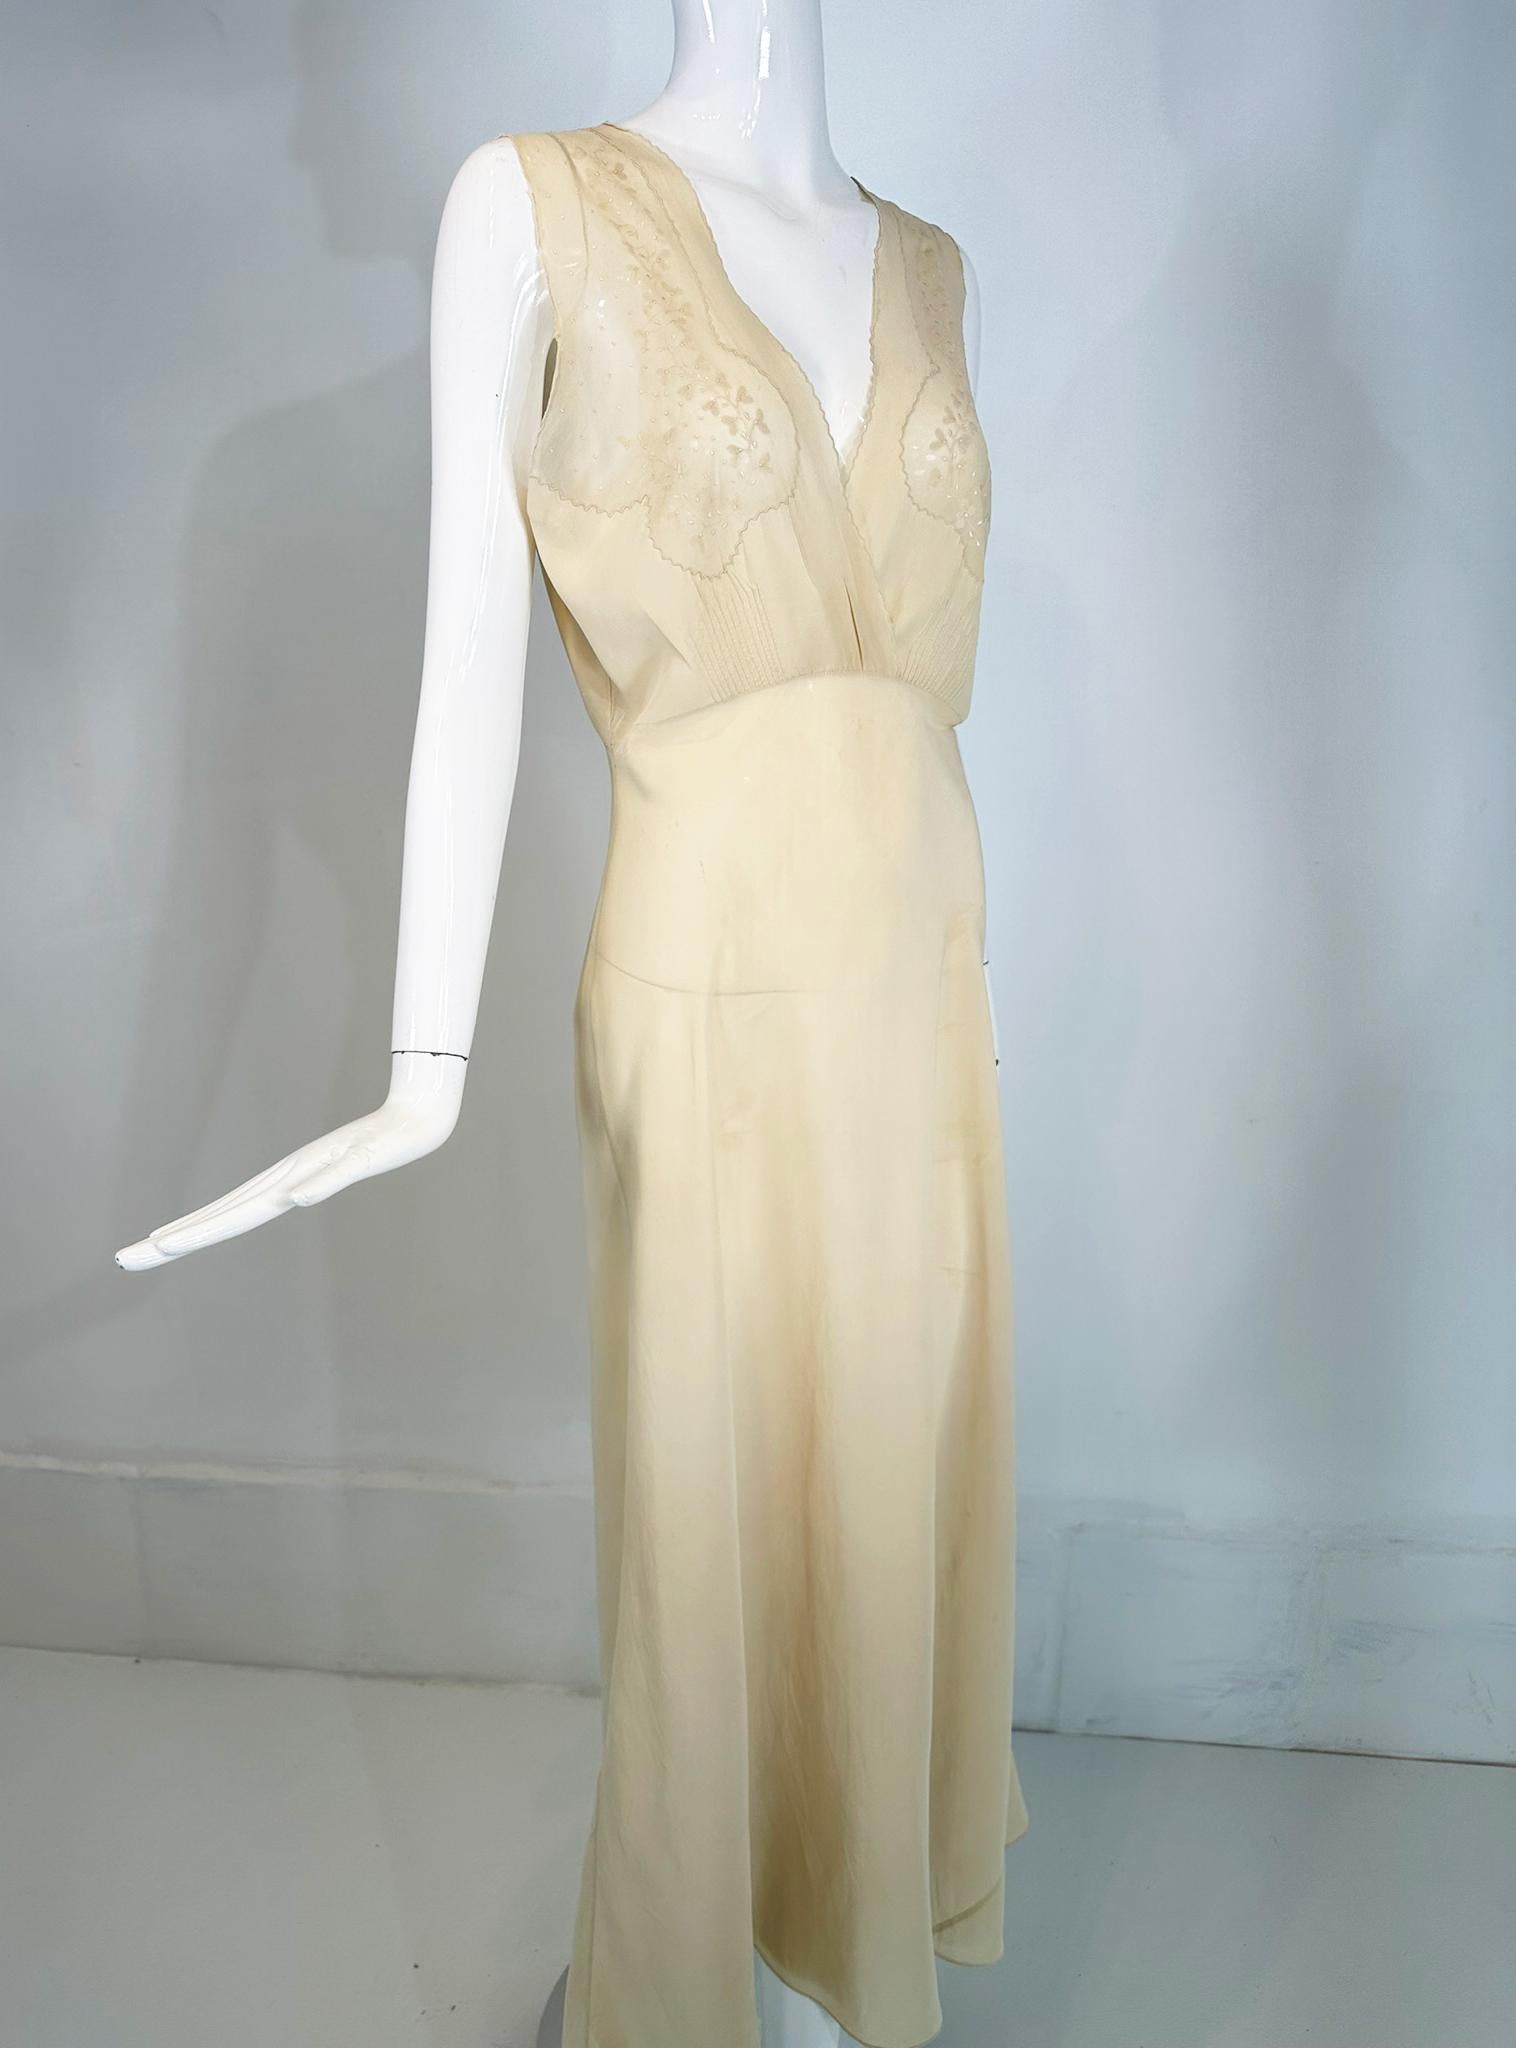 1930s cream bias cut sheer silk hand embroidered & appliqued slip dress gown. Beautiful sheer silk gown in pale cream. The cross over bodice has inset sheer silk panels at the bust, each with delicate applique & embroidery. The gown has a high